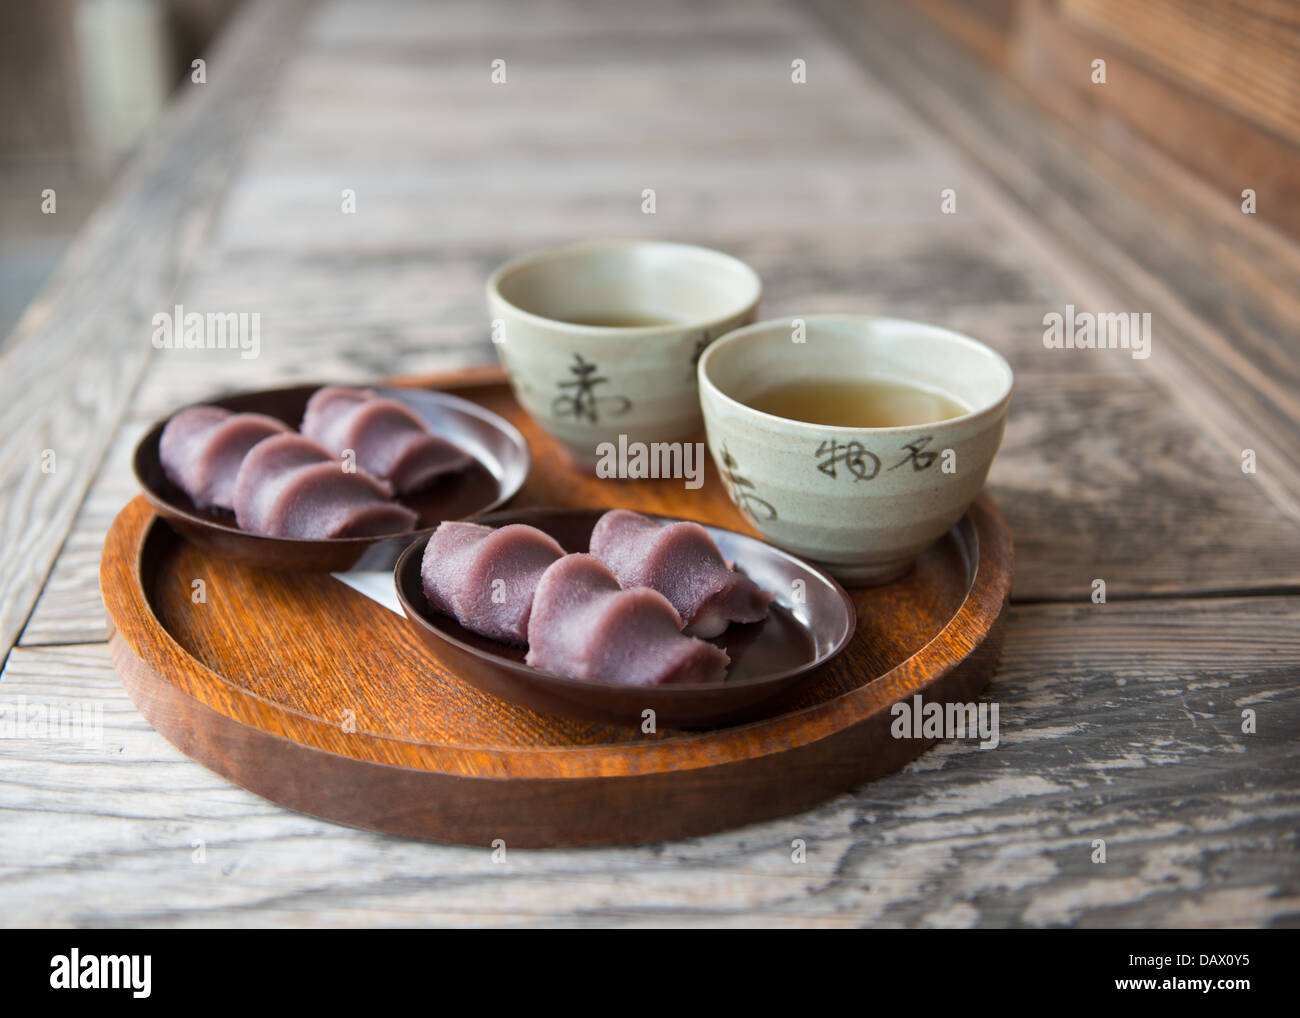 Akafuku mochi. Rice cake covered with sweet red beans. 赤福餅 Stock Photo